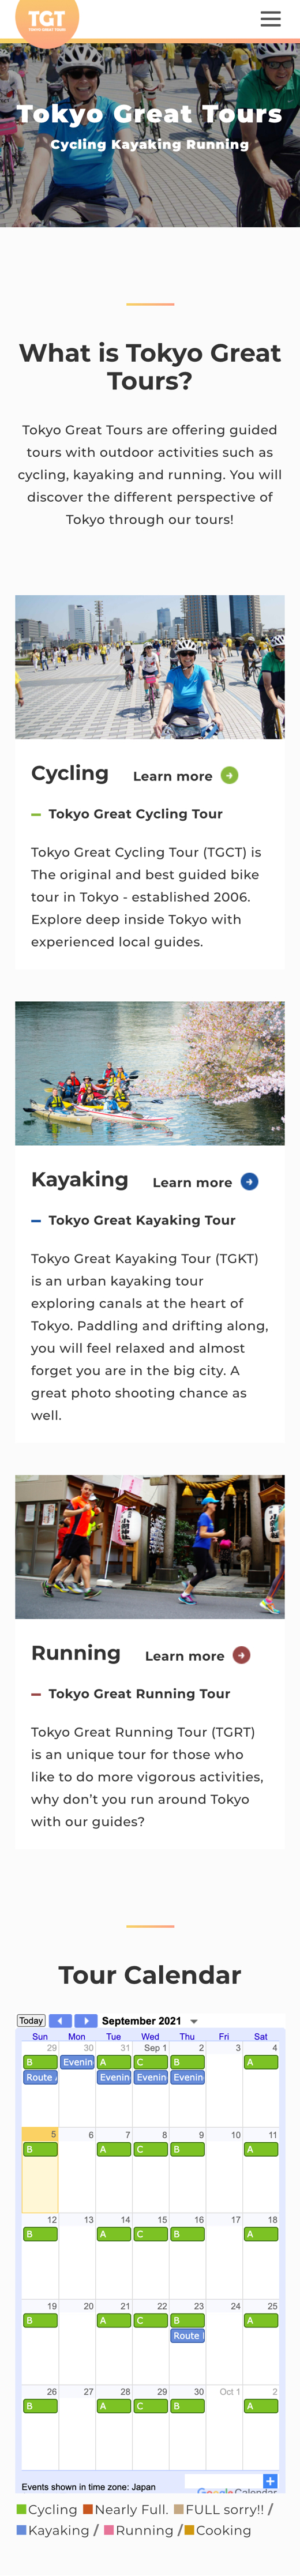 Tokyo Great Tours（スマホ）